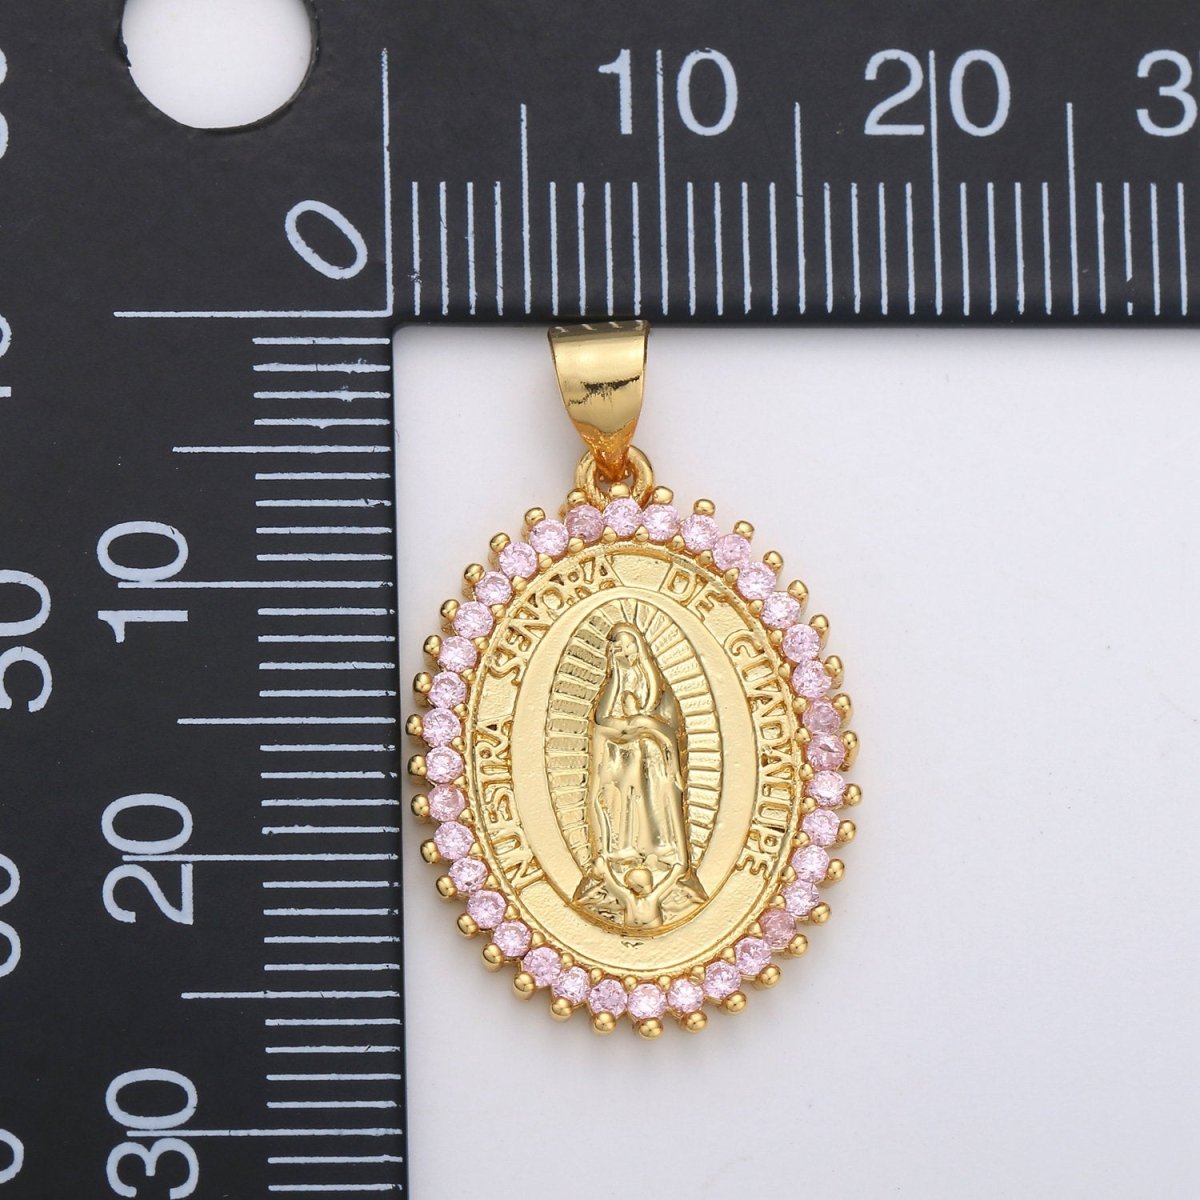 Overstock Clearance 24k Gold Filled Virgin Mary Pendant Necklace Pink Micro Pave Virgen de Guadalupe Medallion Pendant for Necklace Religious Jewelry Supply I-649 I-650 - DLUXCA